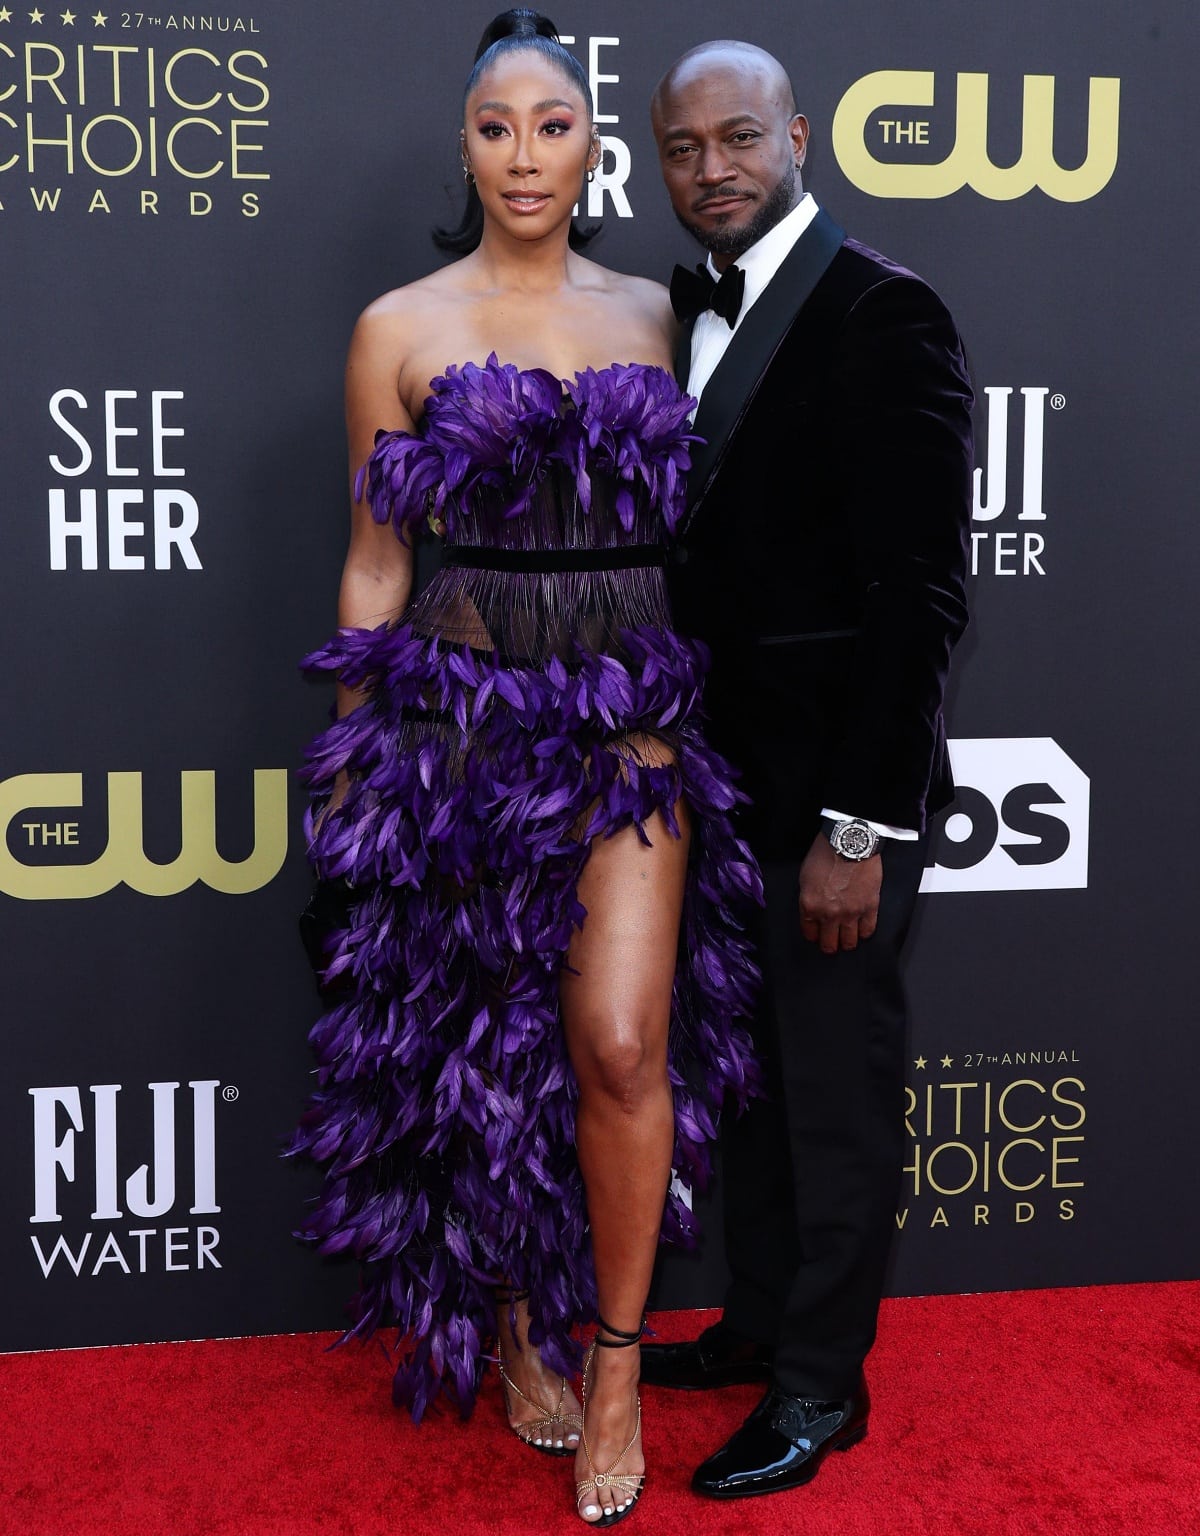 Apryl Jones in high heels appearing taller than Taye Diggs in glossy black dress shoes at the 27th Annual Critics Choice Awards